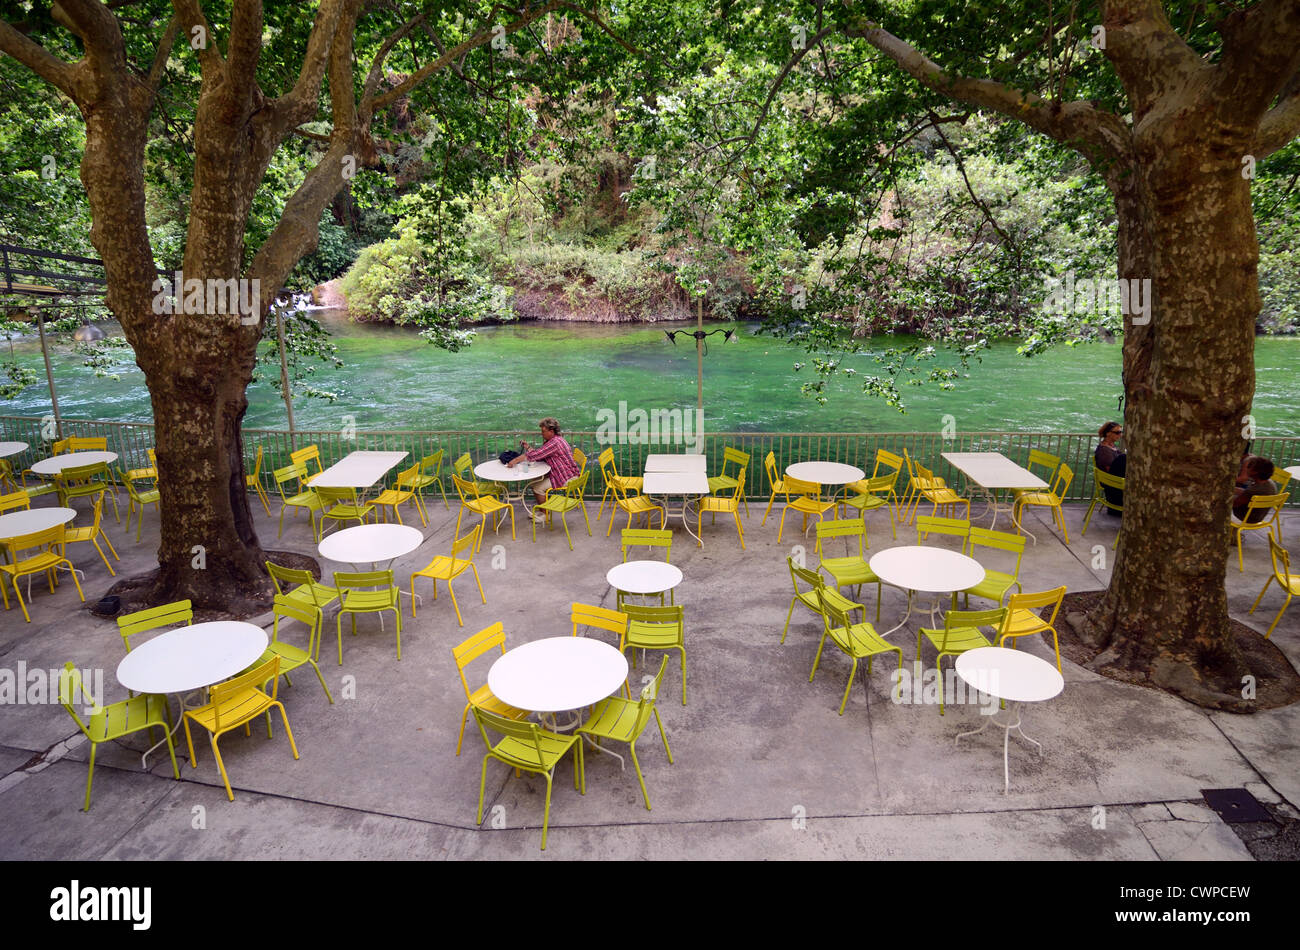 Single Client in an Otherwise Deserted Pavement Cafe, Sidewalk Cafeor Riverside Restaurant along River Sorgue at Fontaine-de-Vaucluse Provence France Stock Photo